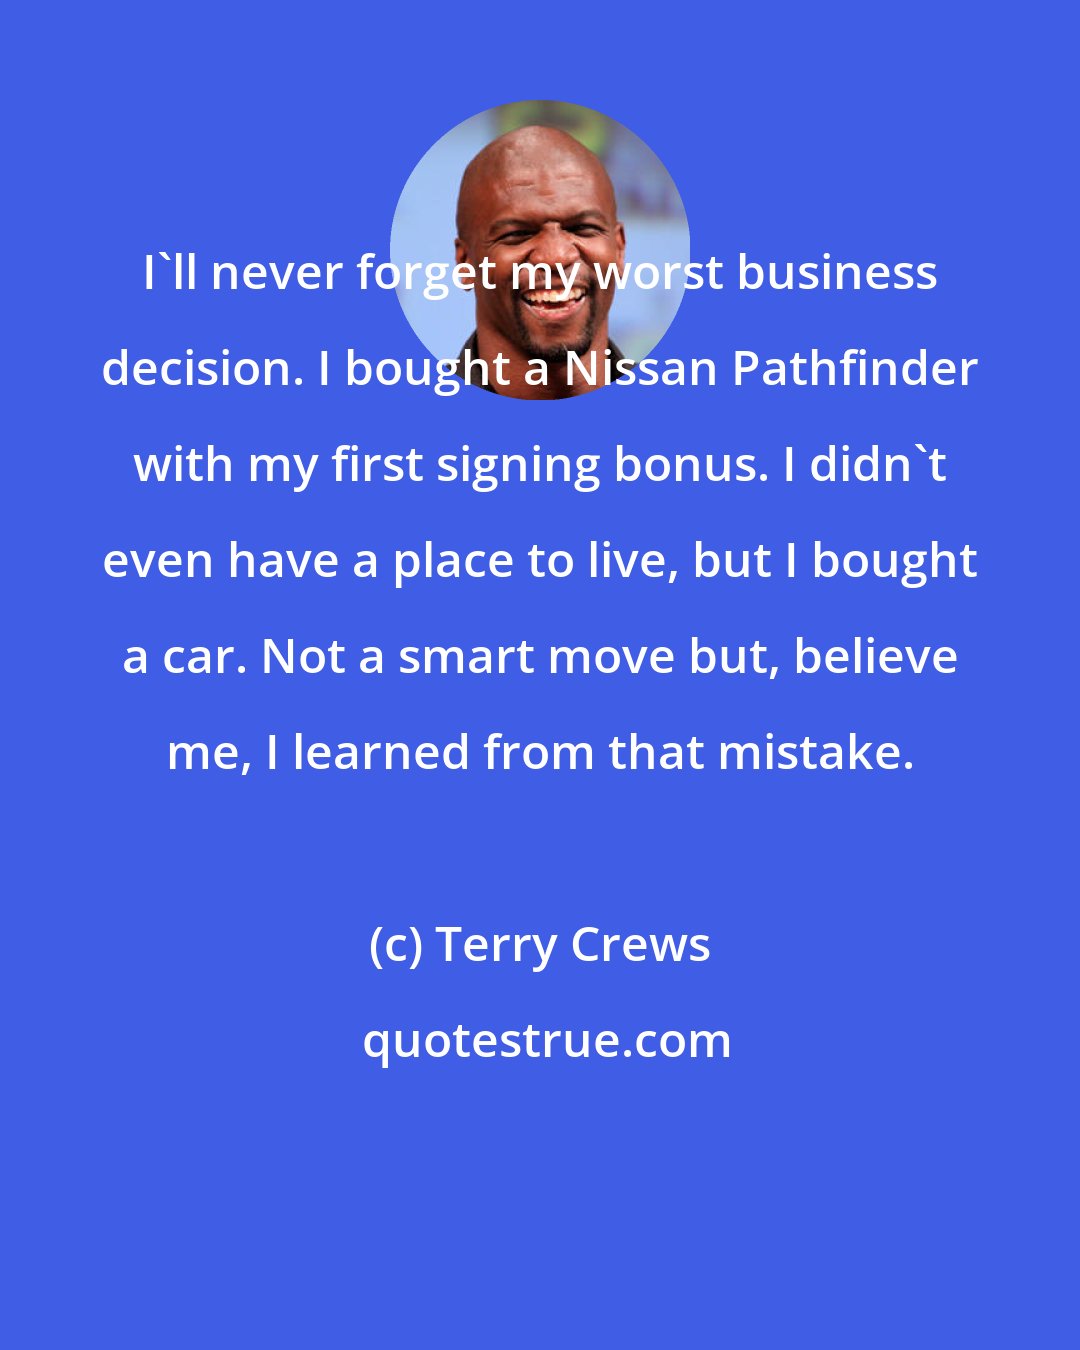 Terry Crews: I'll never forget my worst business decision. I bought a Nissan Pathfinder with my first signing bonus. I didn't even have a place to live, but I bought a car. Not a smart move but, believe me, I learned from that mistake.